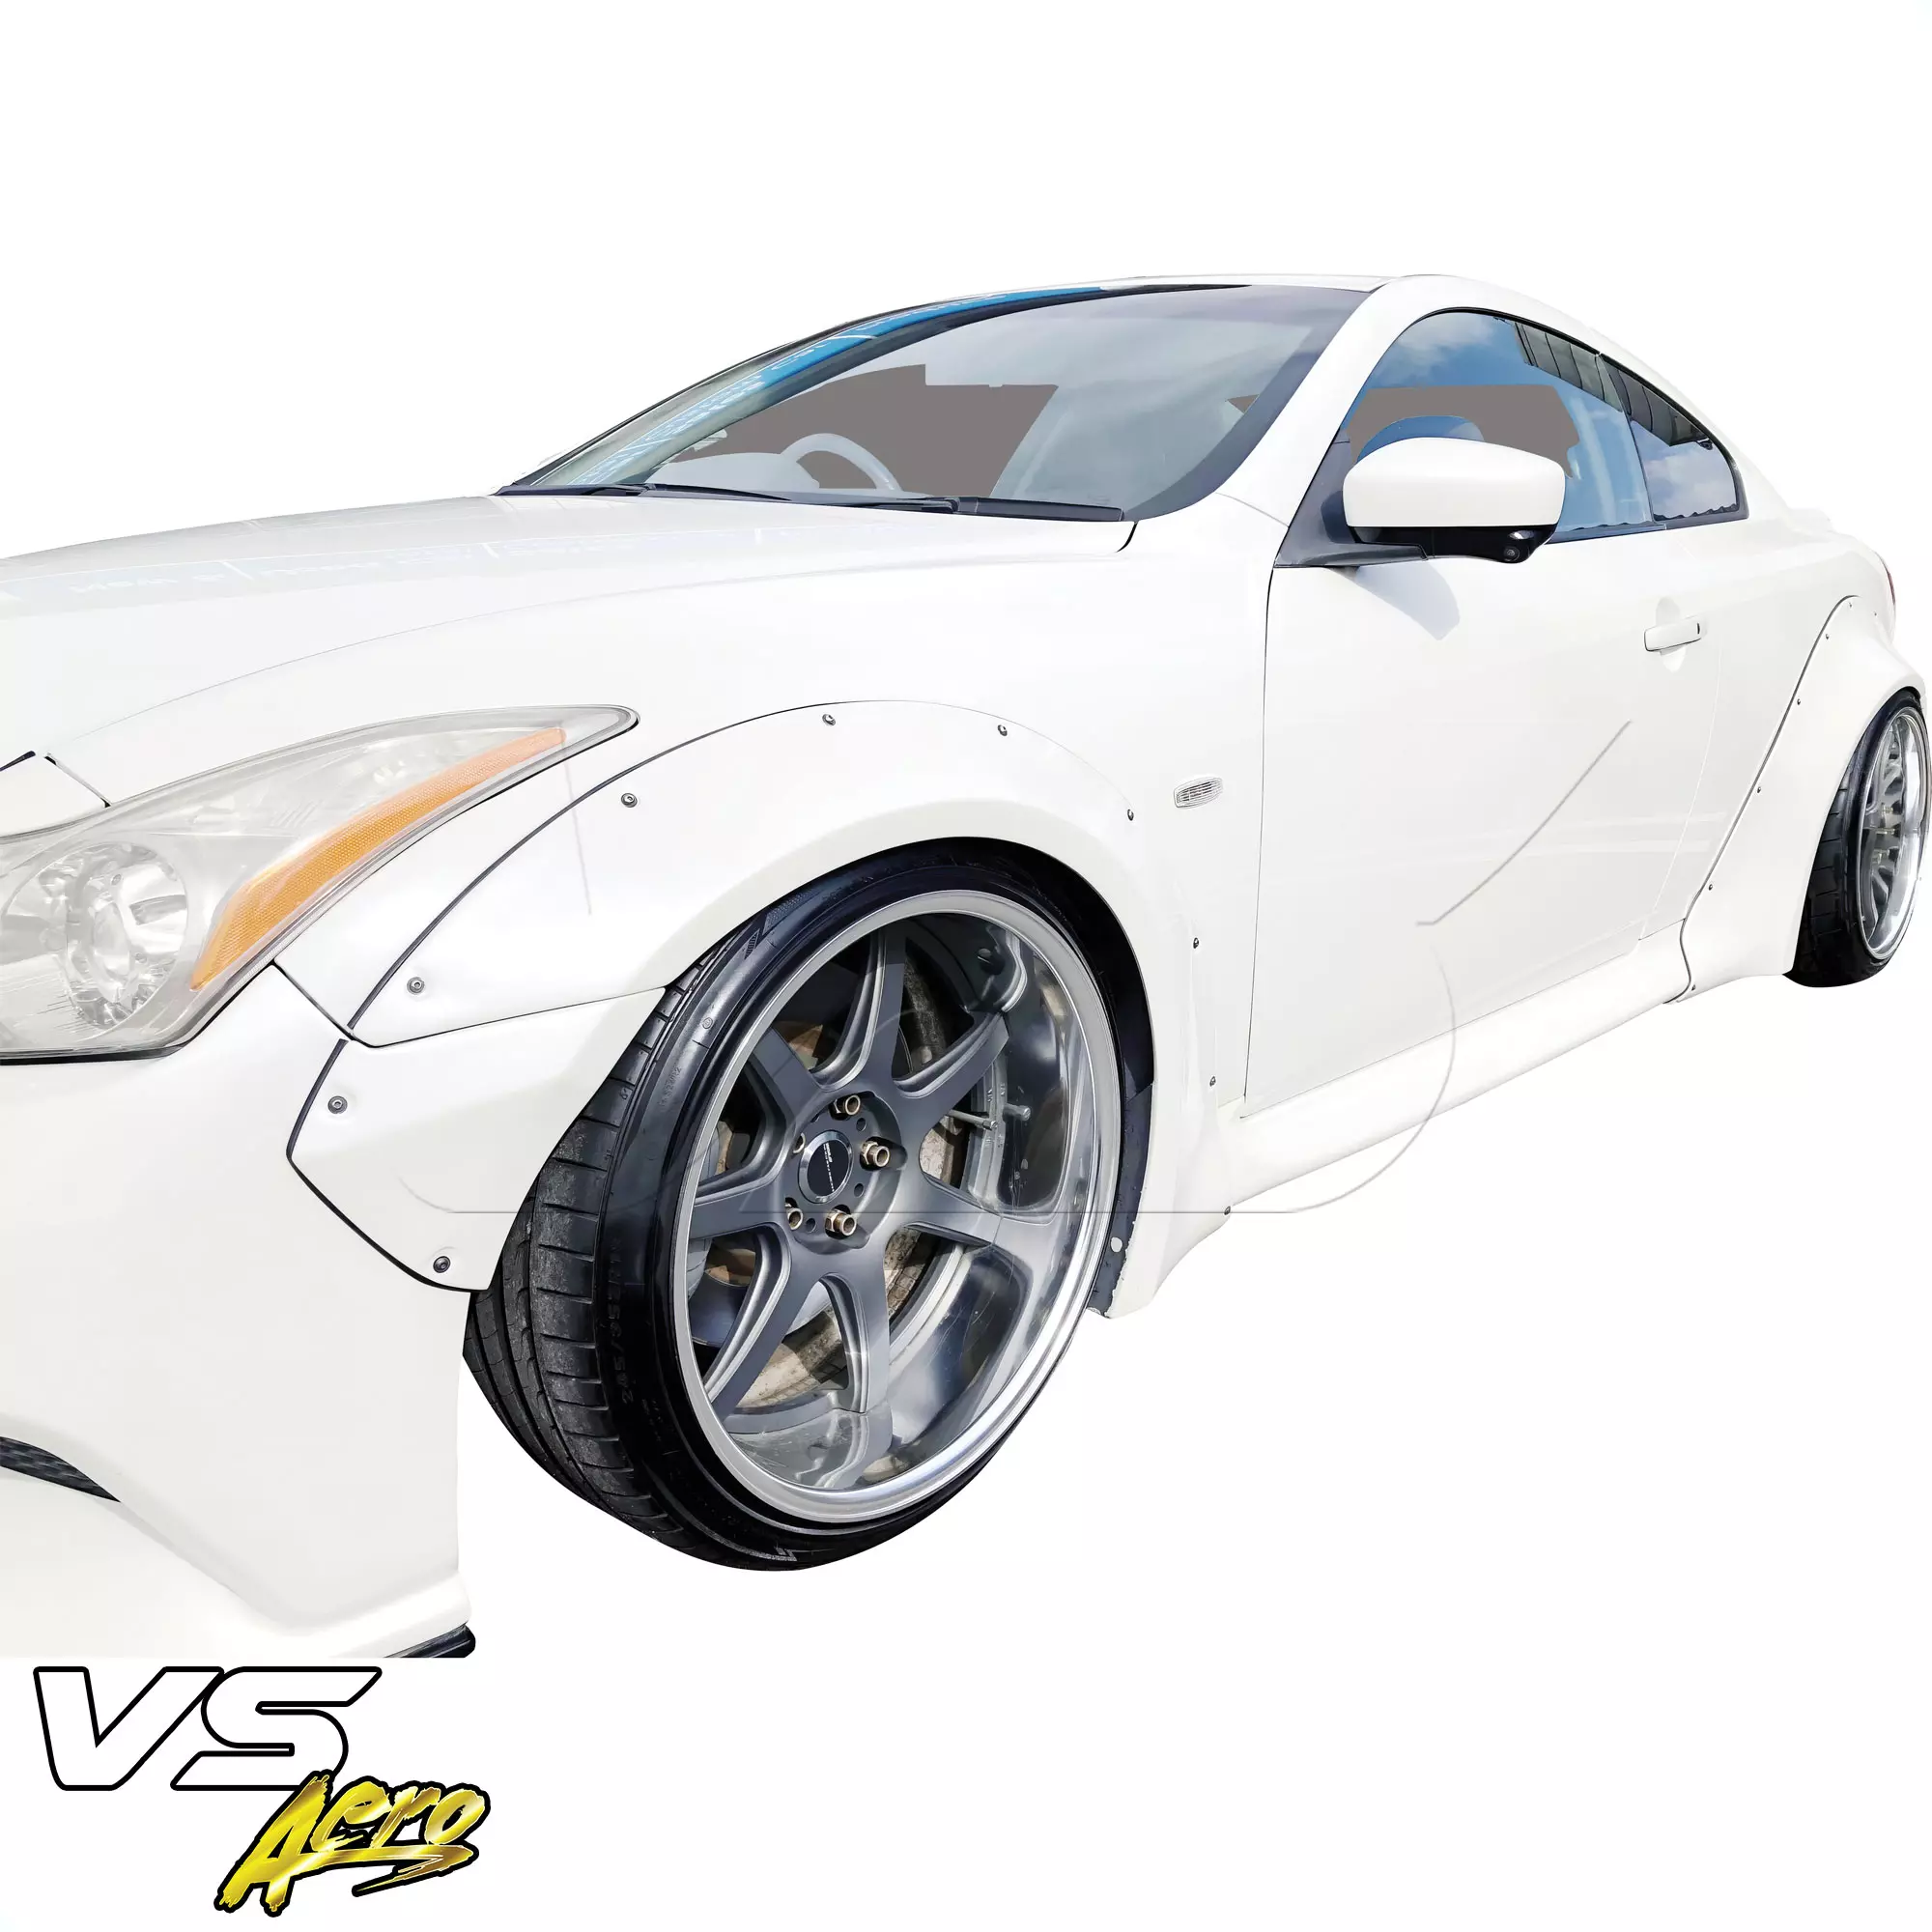 VSaero FRP LBPE Wide Body Fender Flares (front) 4pc > Infiniti G37 Coupe 2008-2015 > 2dr Coupe - Image 7